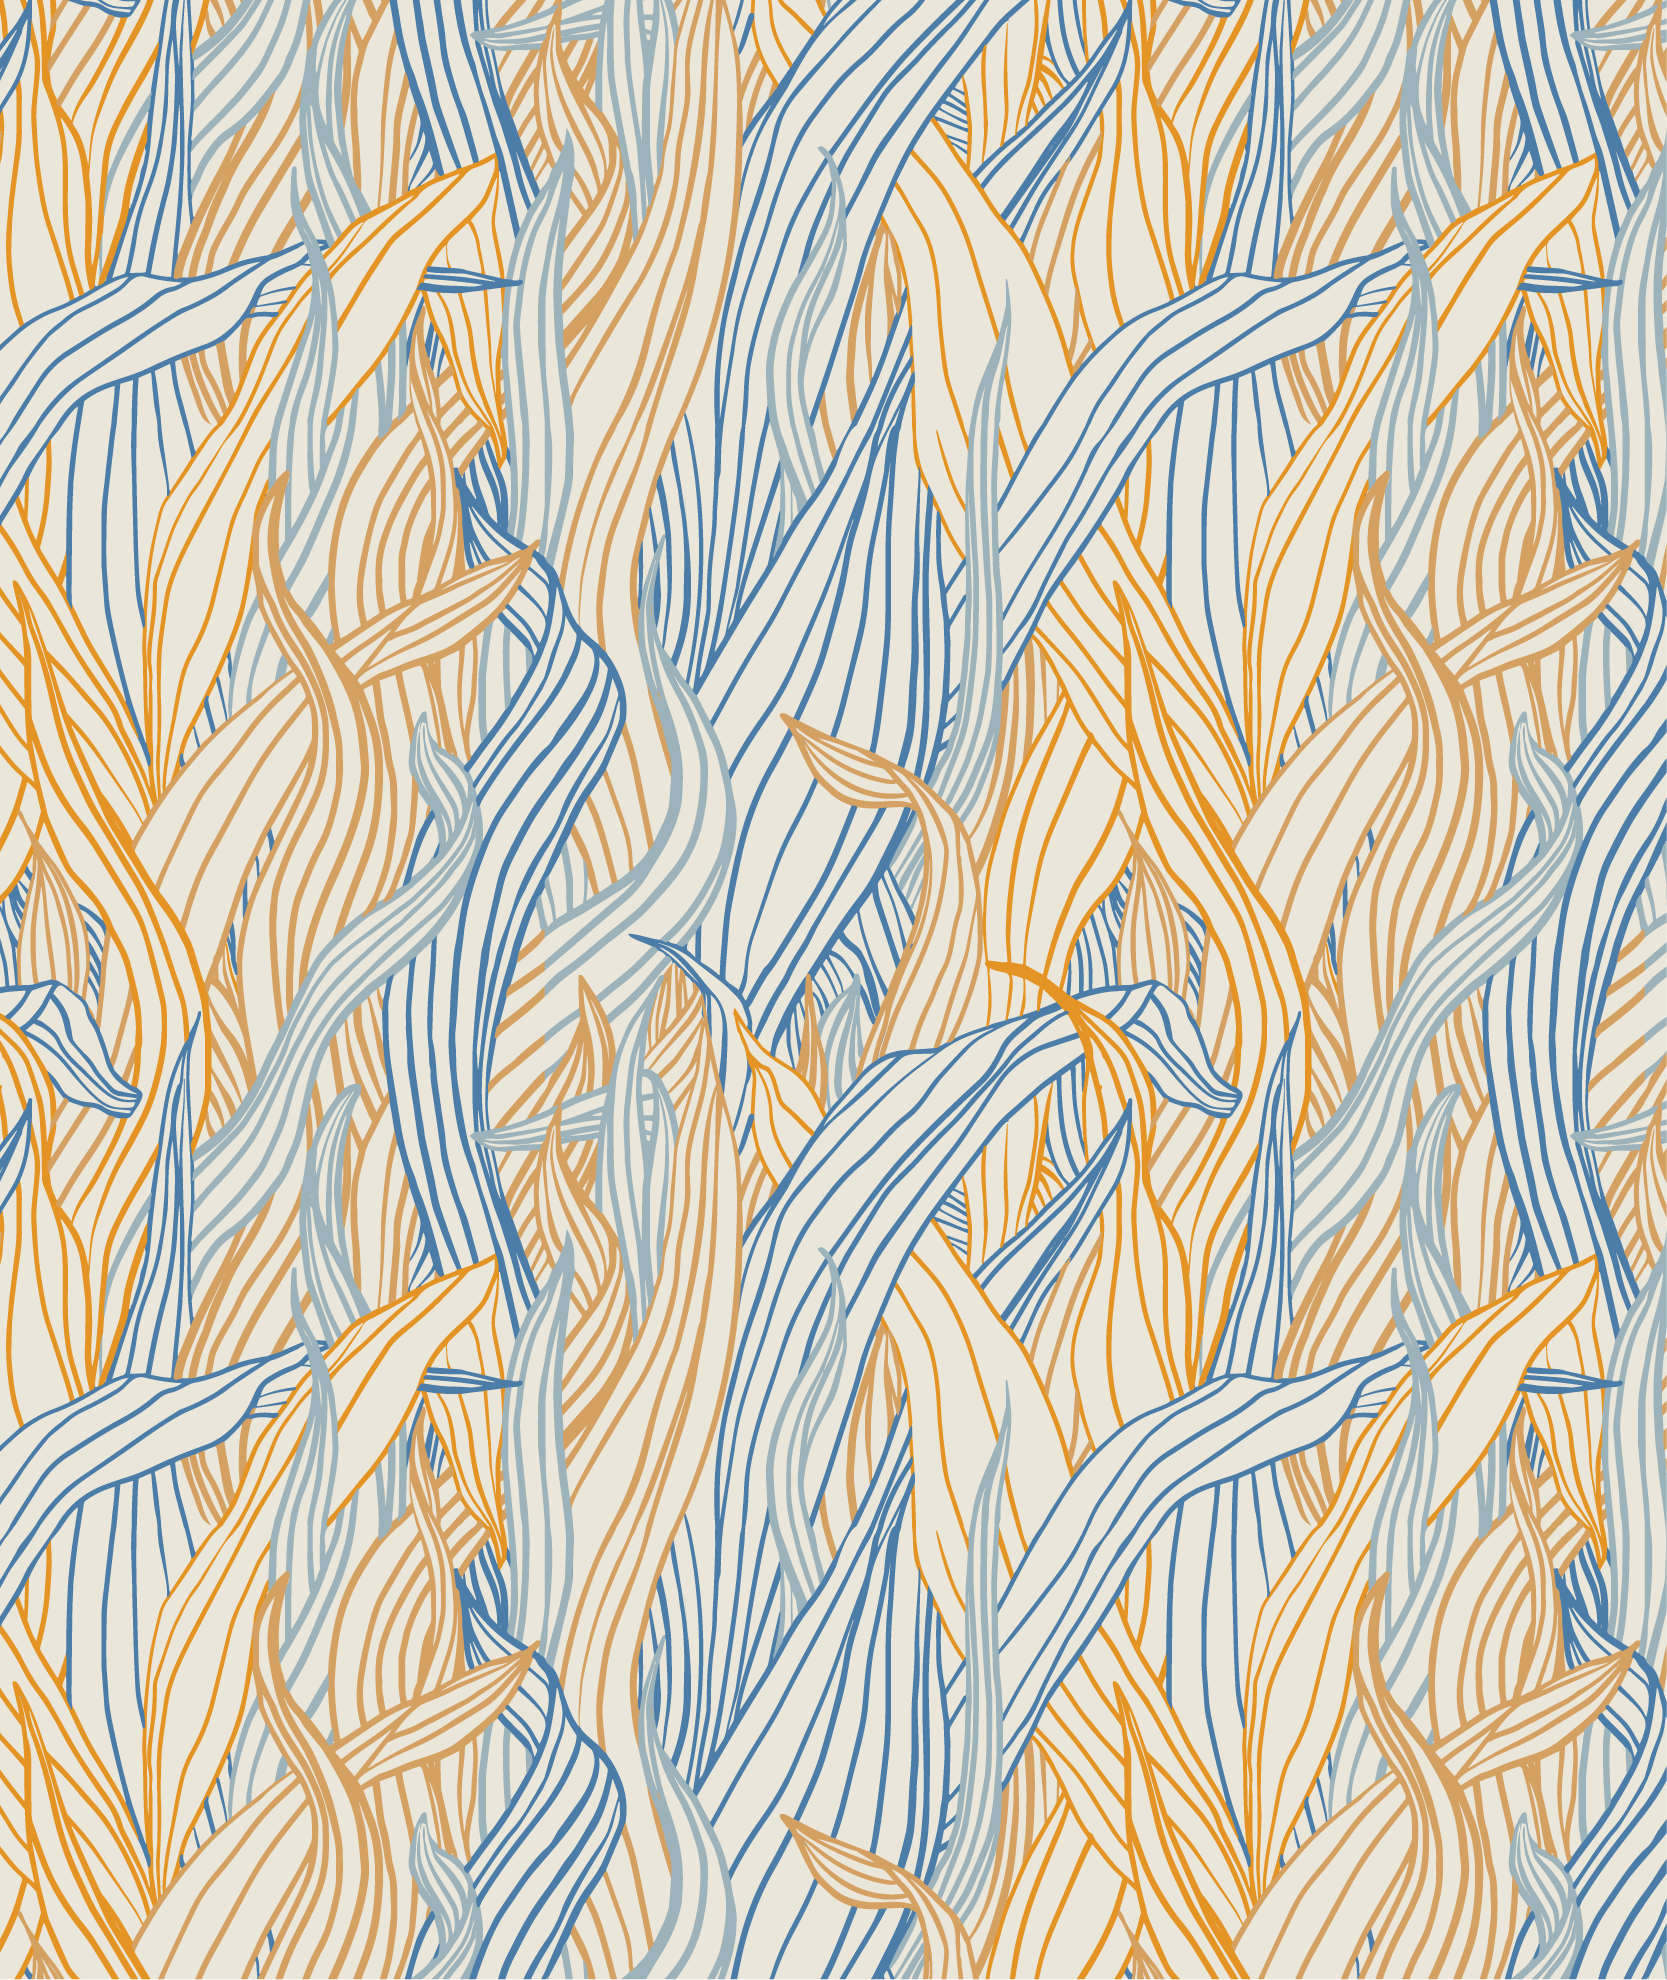 Tall grass in orange and teal, from Magical Weeds collection